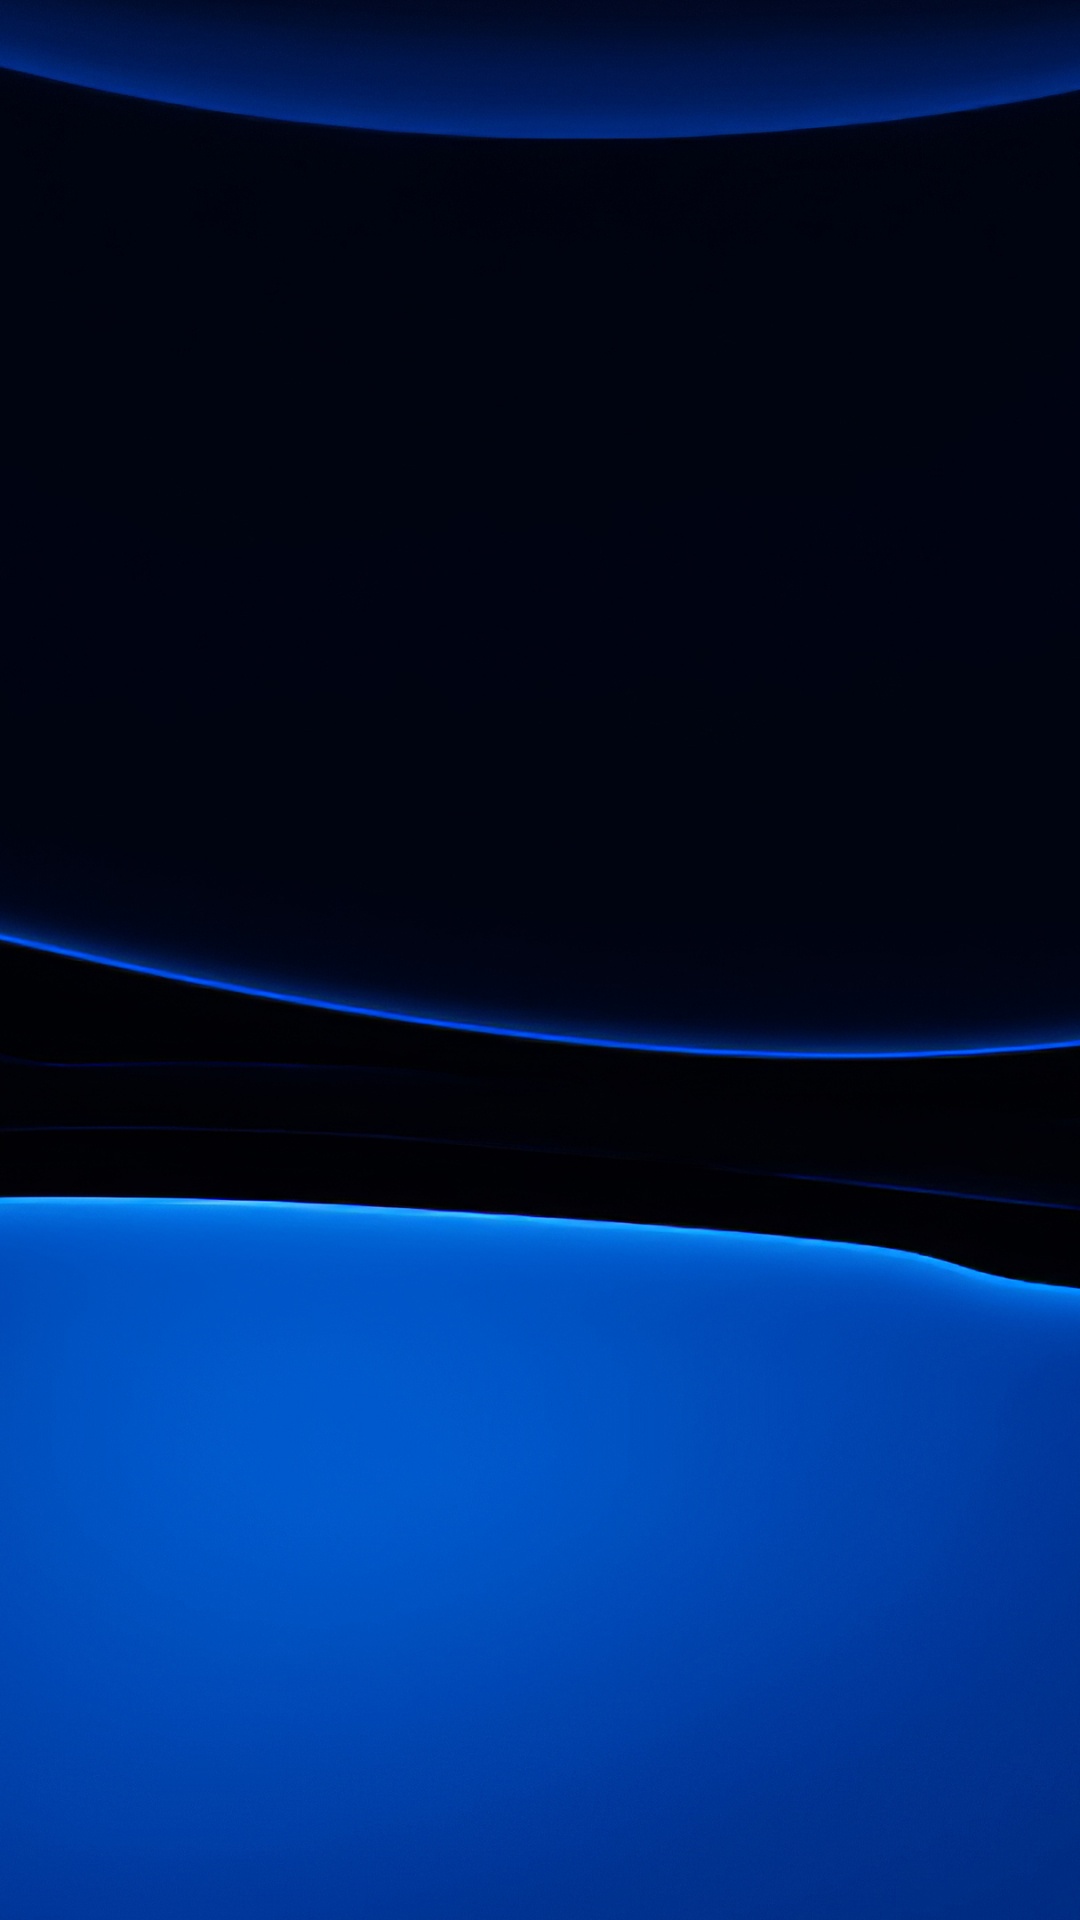 Blue and White Digital Wallpaper. Wallpaper in 1080x1920 Resolution